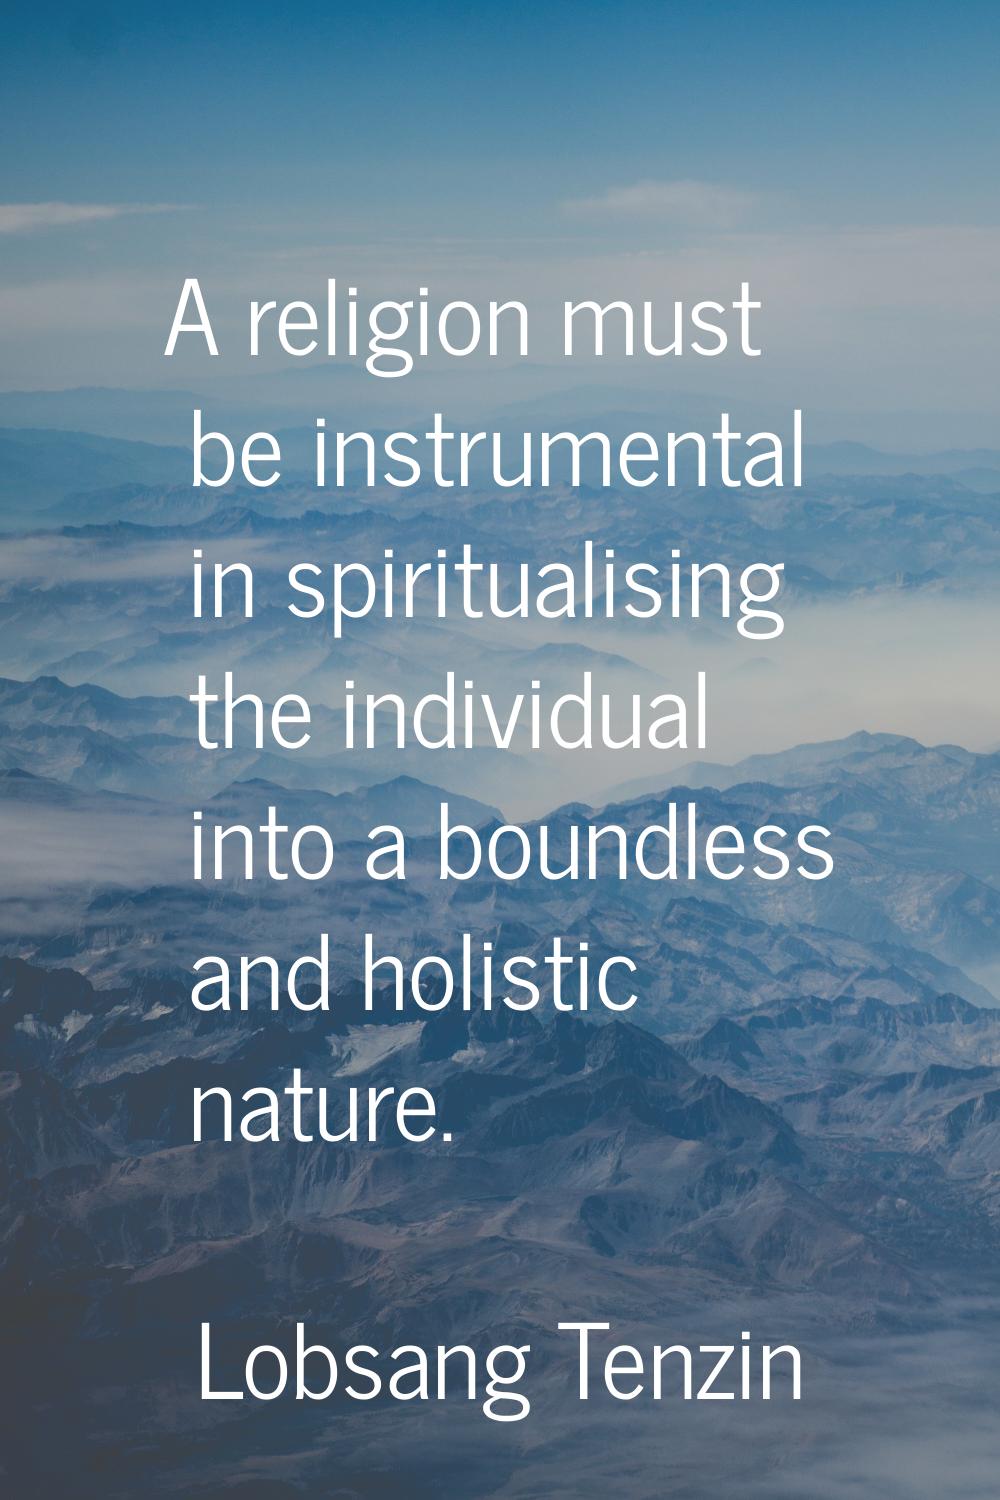 A religion must be instrumental in spiritualising the individual into a boundless and holistic natu